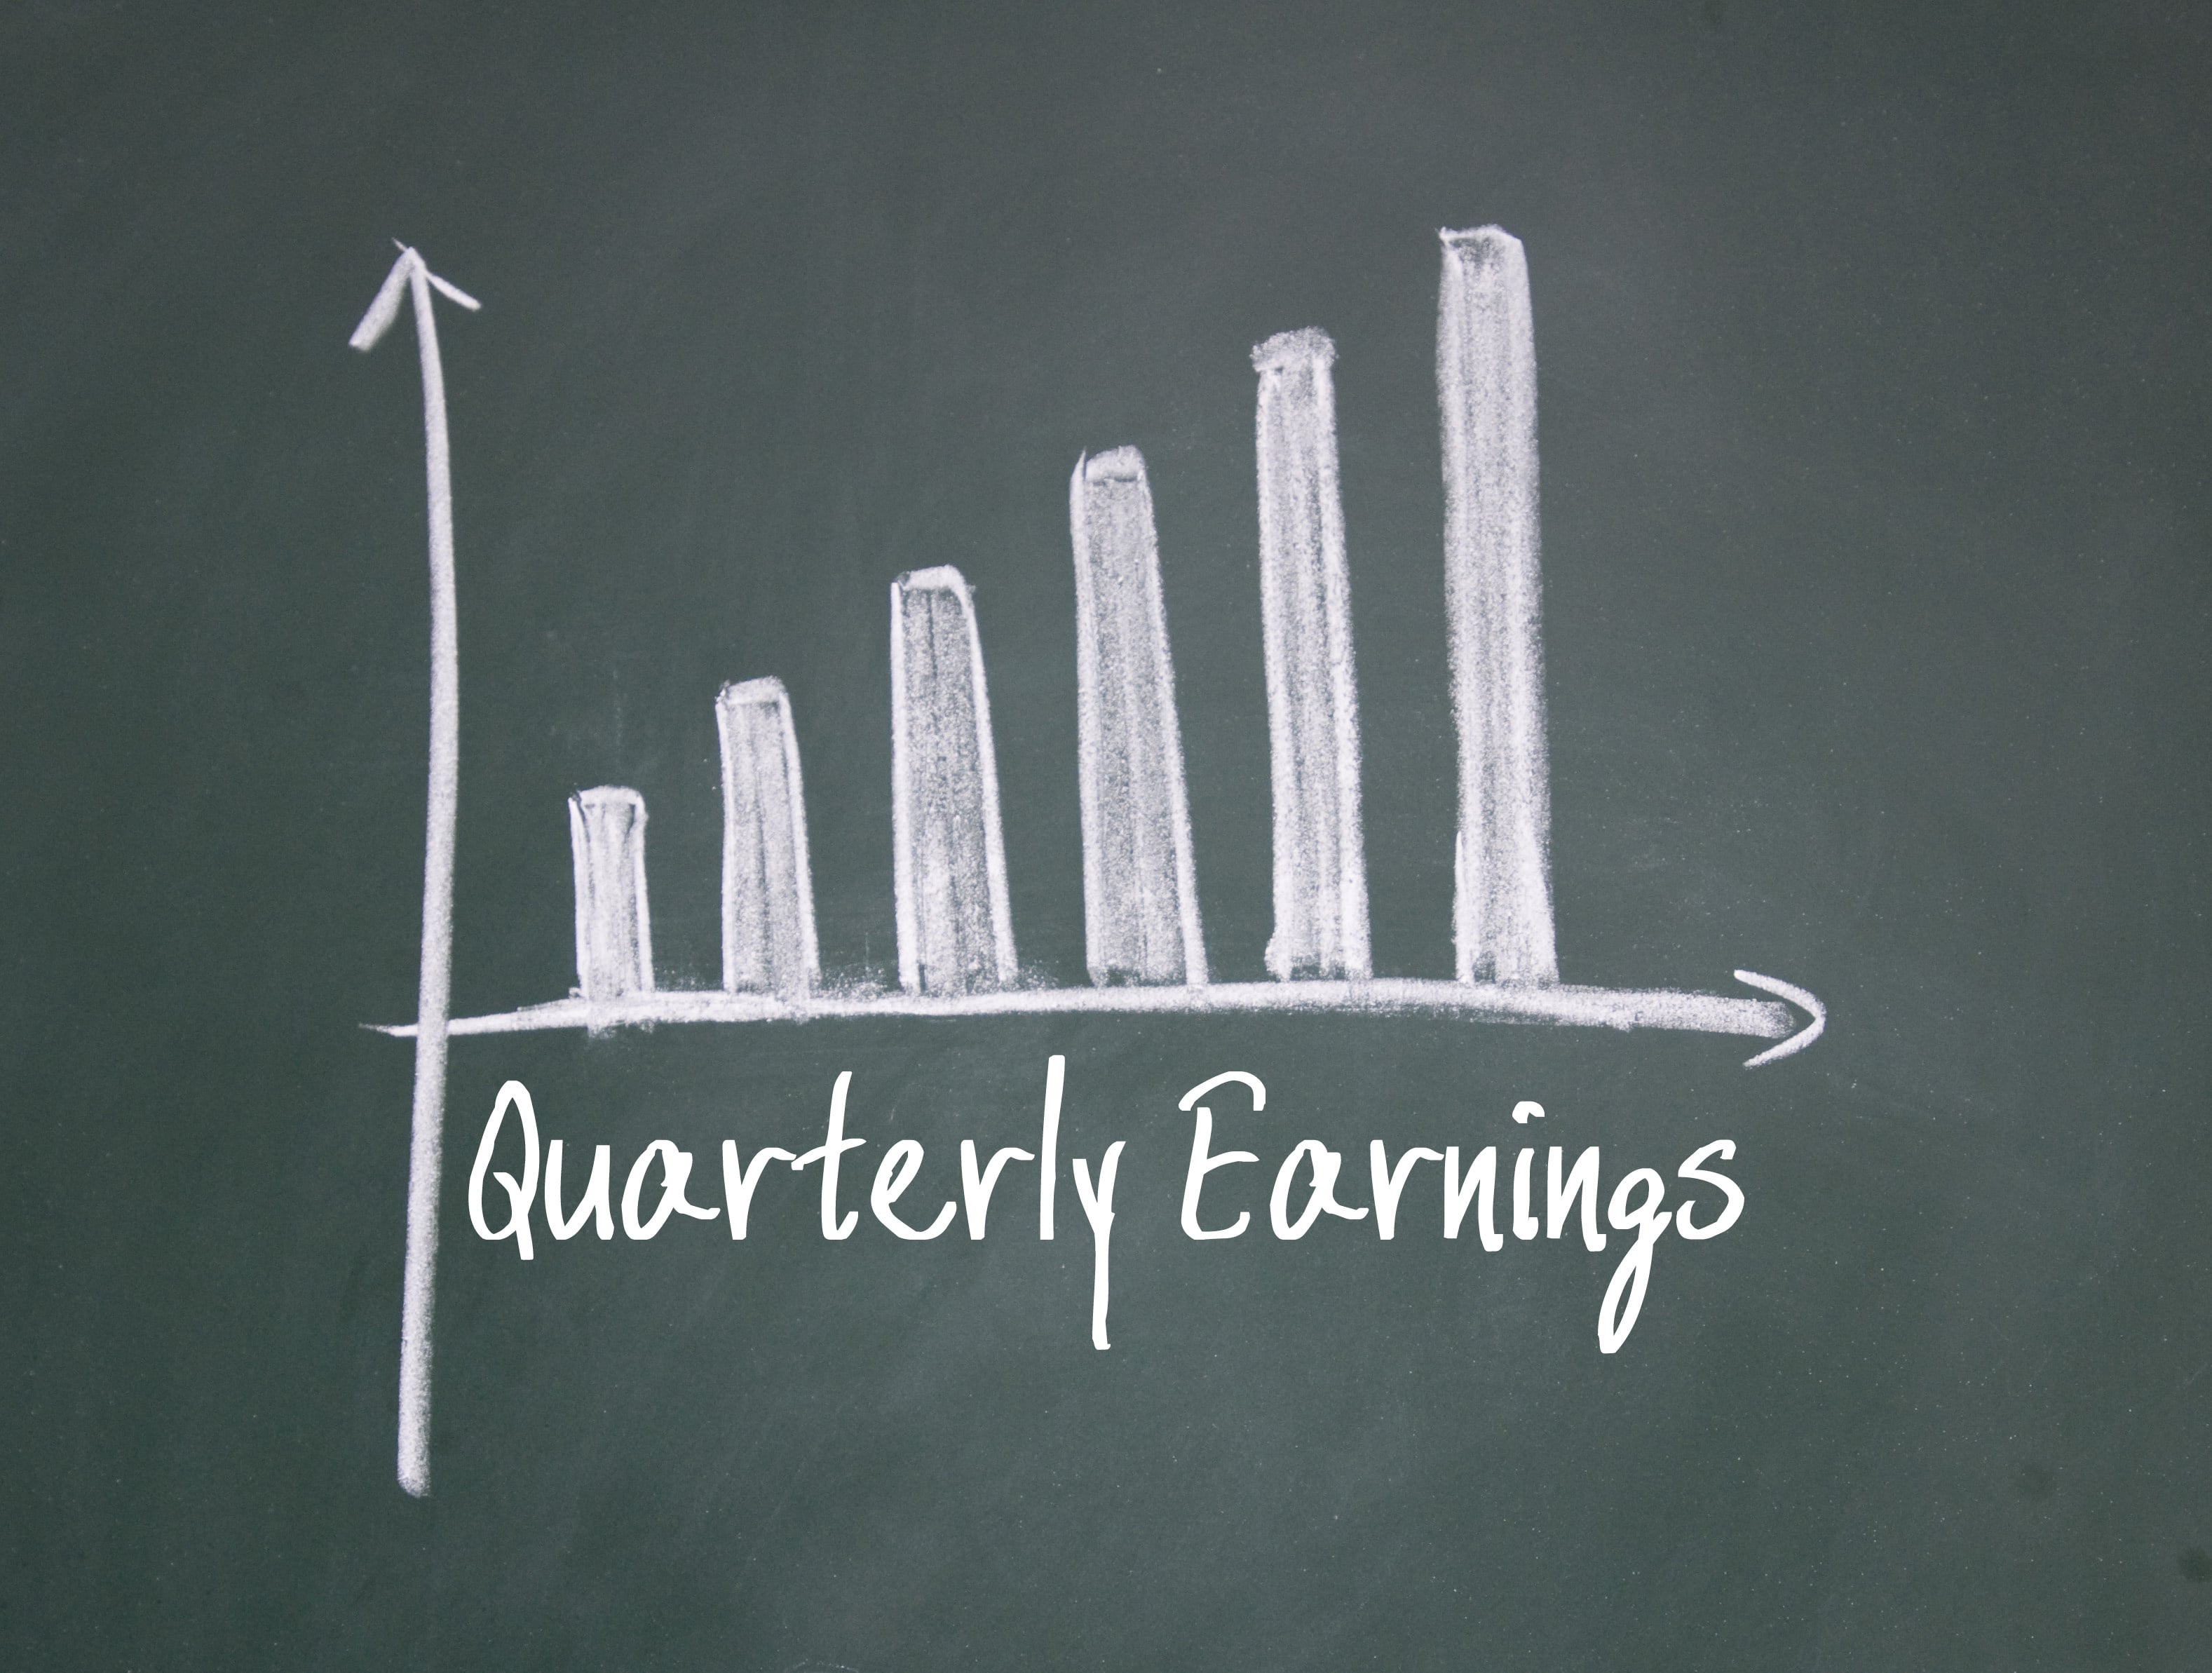 Gap trading strategy for earnings